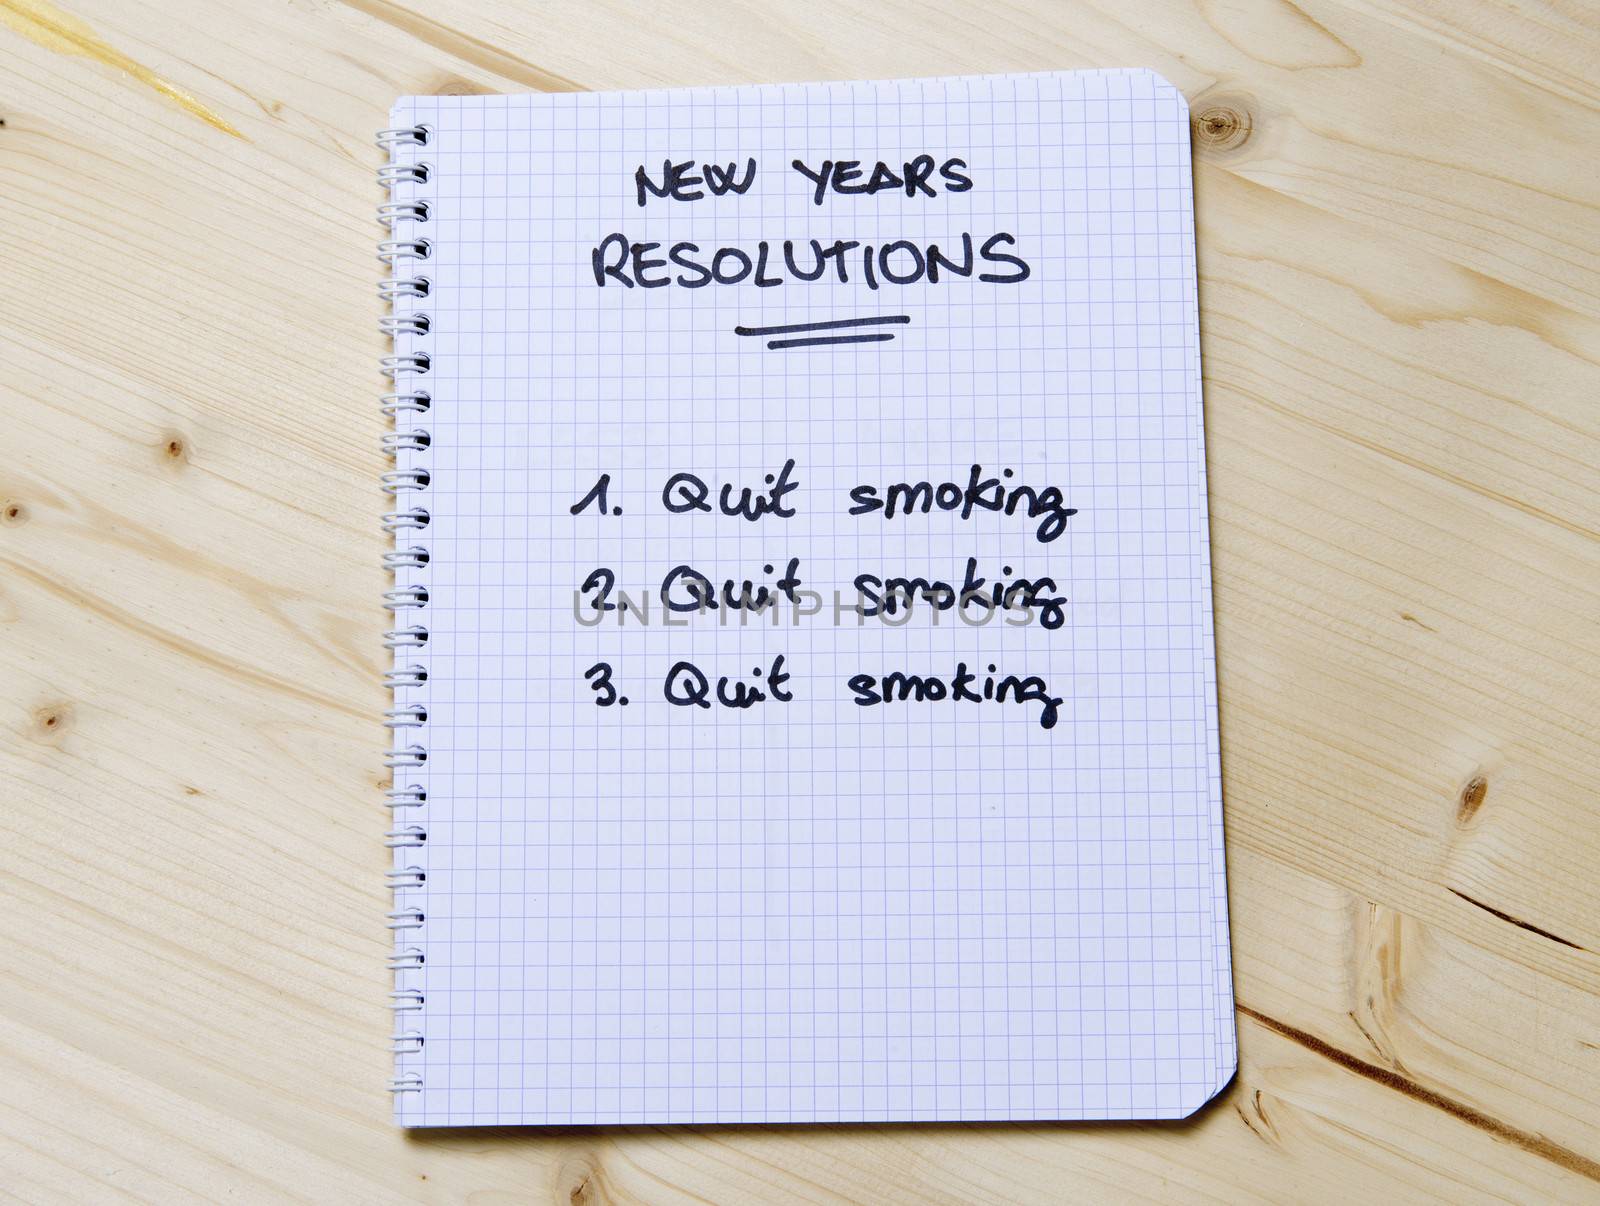 New Years Resolution list of a smoker